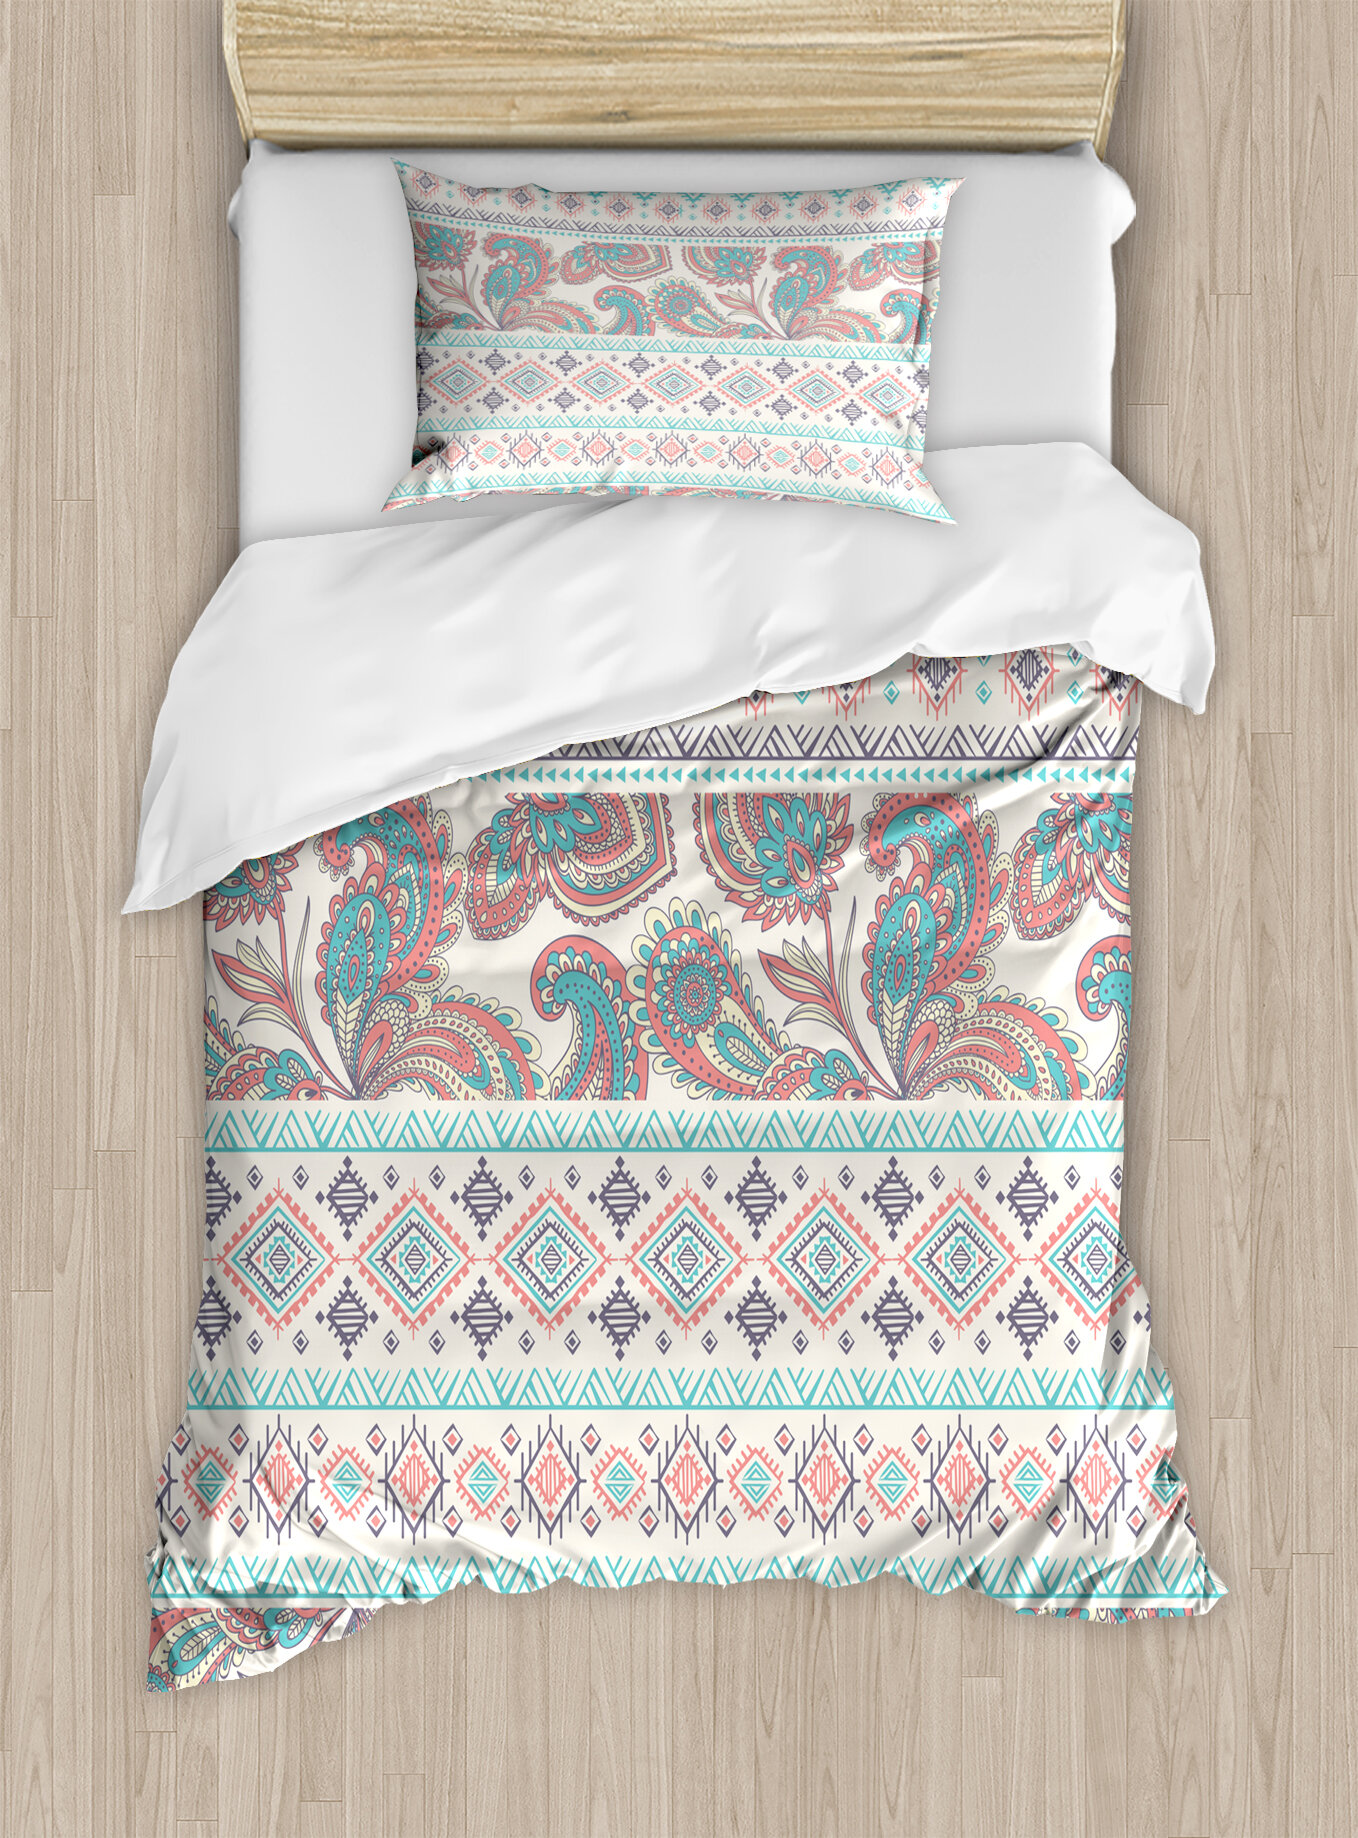 East Urban Home Tribal Paisley Patterns In Native Aztec Mixed